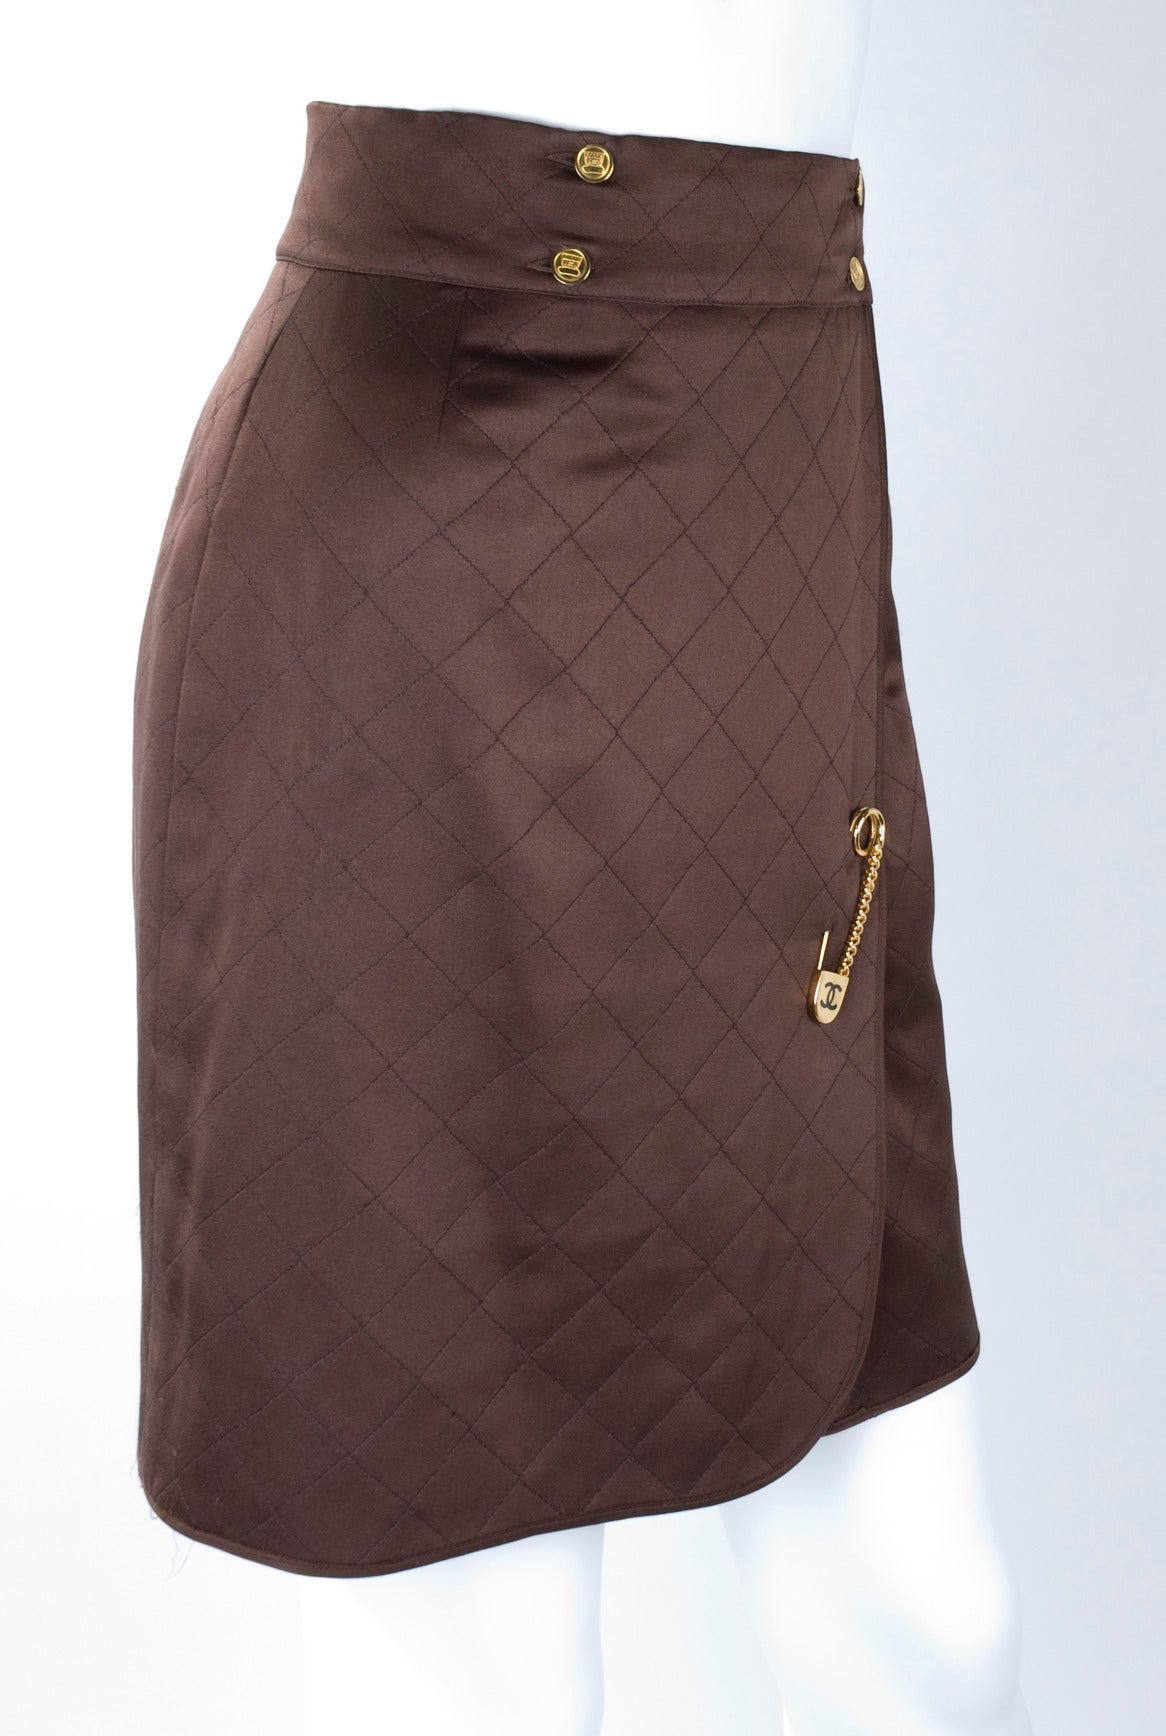 Chanel quilted wrap skirt in brown with CC safety pin.
Circo 1980s
Size label is missing.
The waistband has been extended by a tailor. Please see picture for details.

Measurements:
Length 51 cm -  20